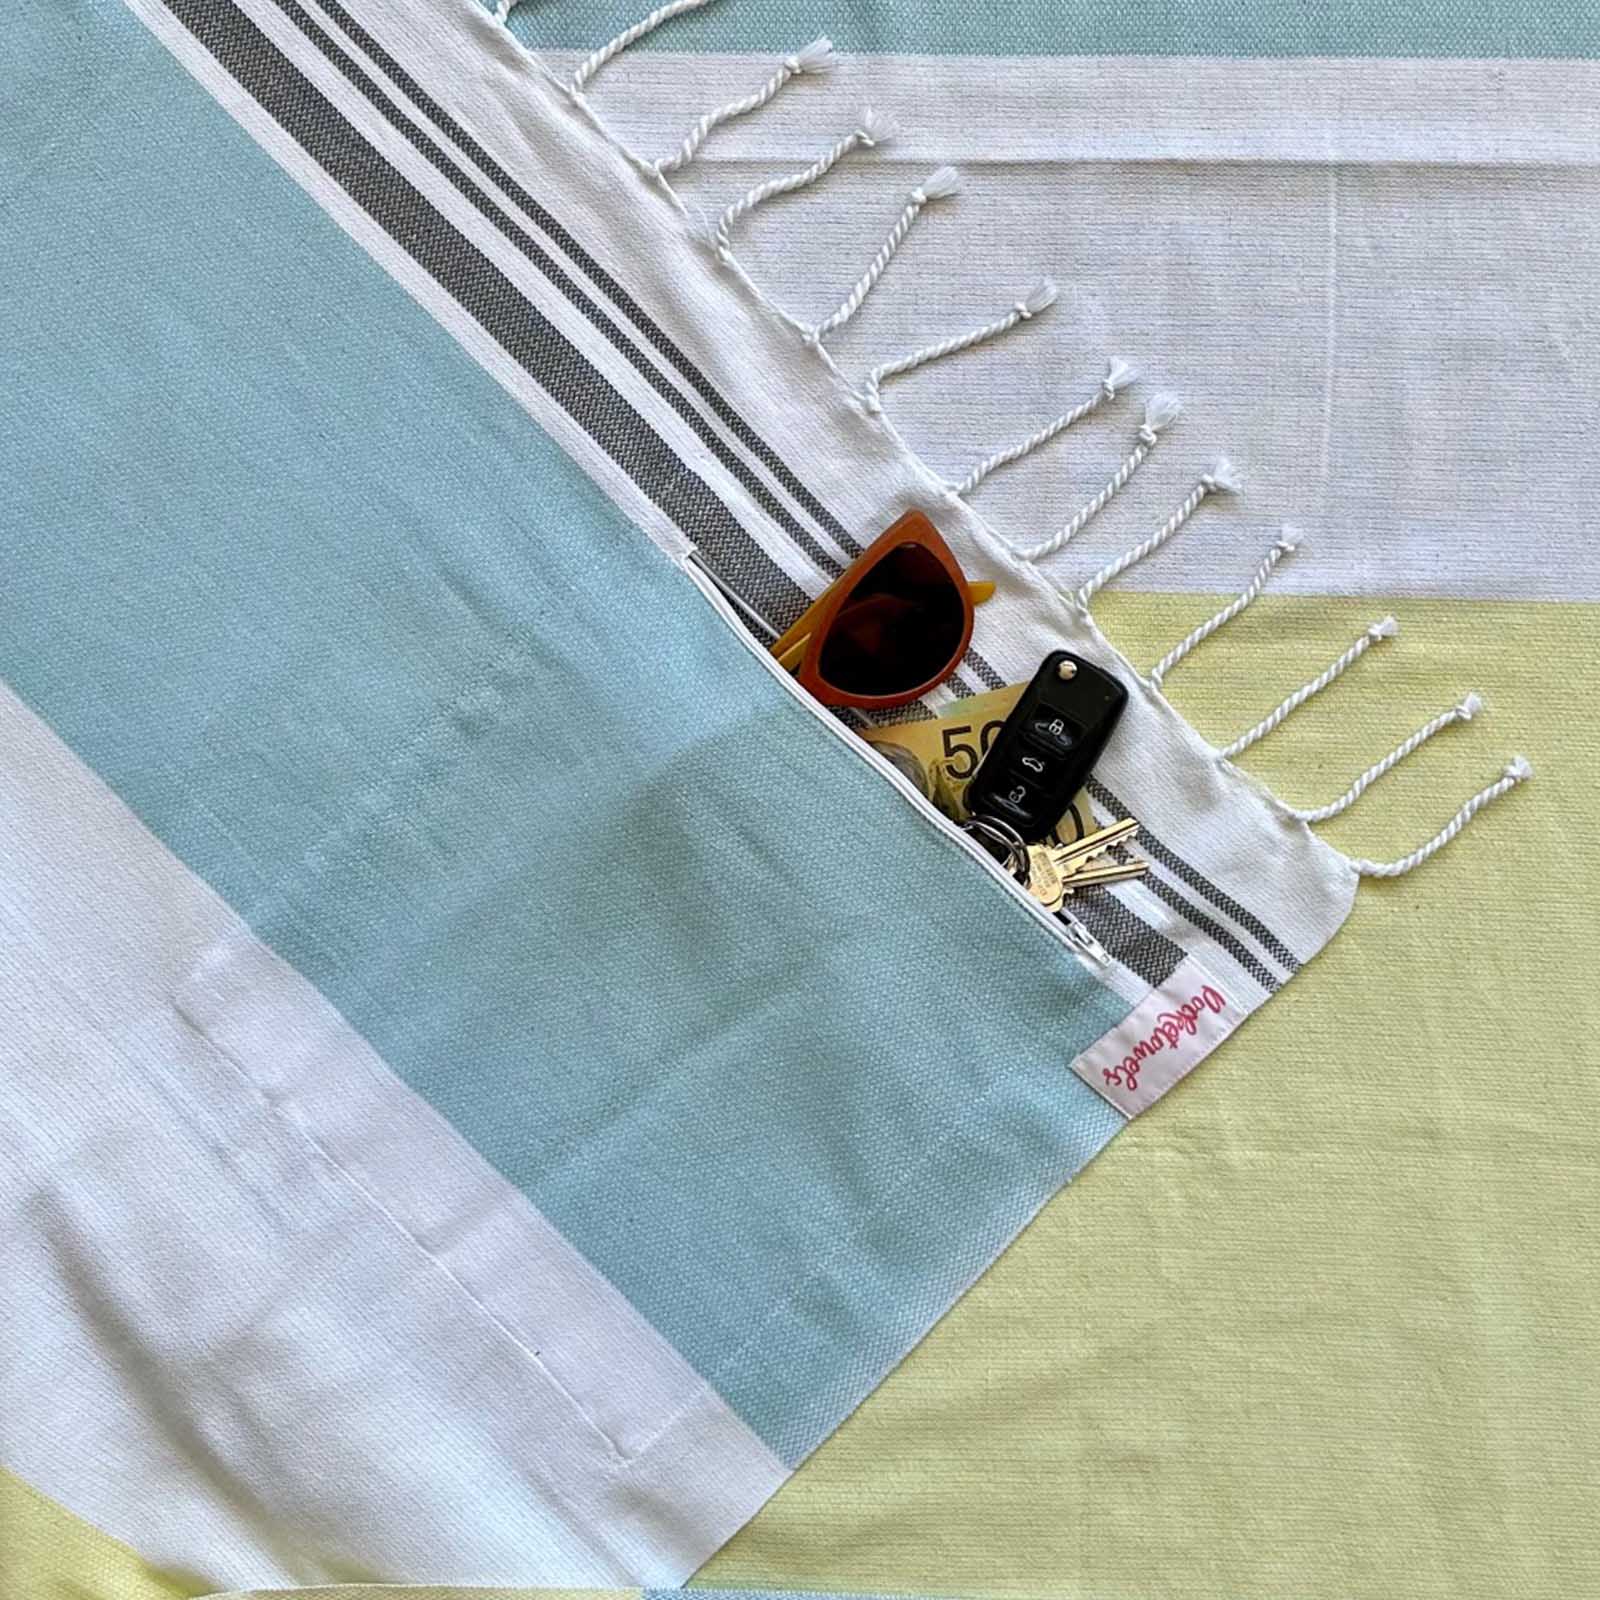 Agatti is a pastel blue and lemon Pocketowel folded - this is a large beach towel with pocket,  by Freostyle